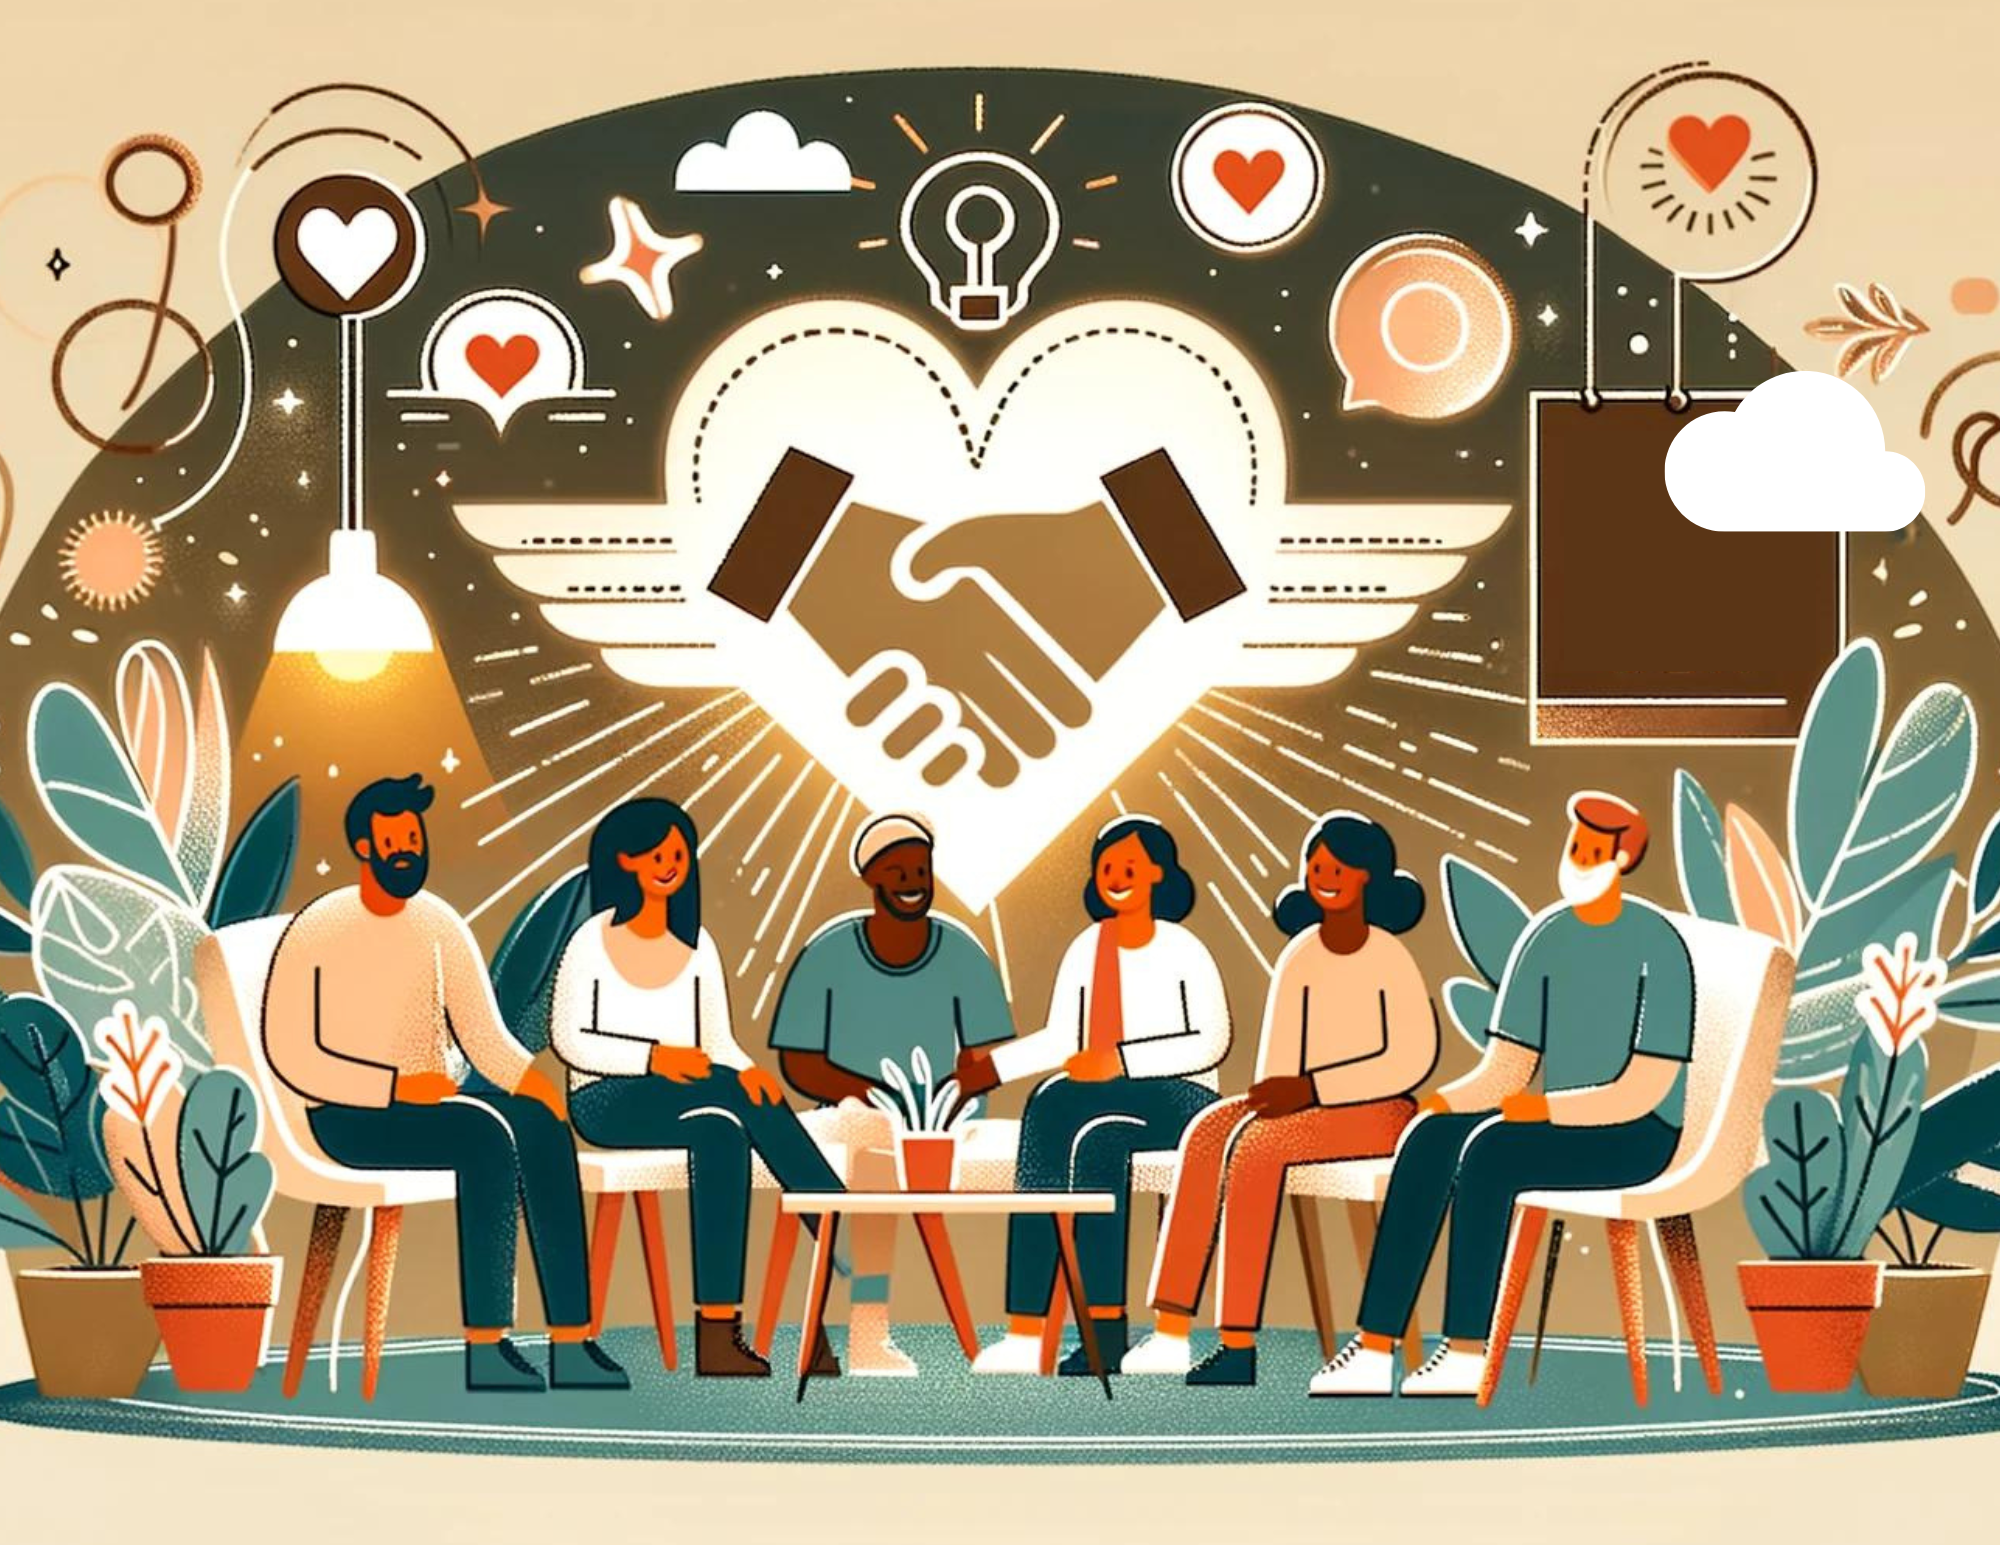 An illustration of a diverse group of people happily interacting in a warm, inviting space that symbolizes a strong sense of belonging. They are sitting in a circle, sharing ideas, and engaging in friendly conversation. The background features cozy elements like plants, soft lighting, and a banner with the brand logo, highlighting the importance of fostering a sense of belonging in community-driven branding.